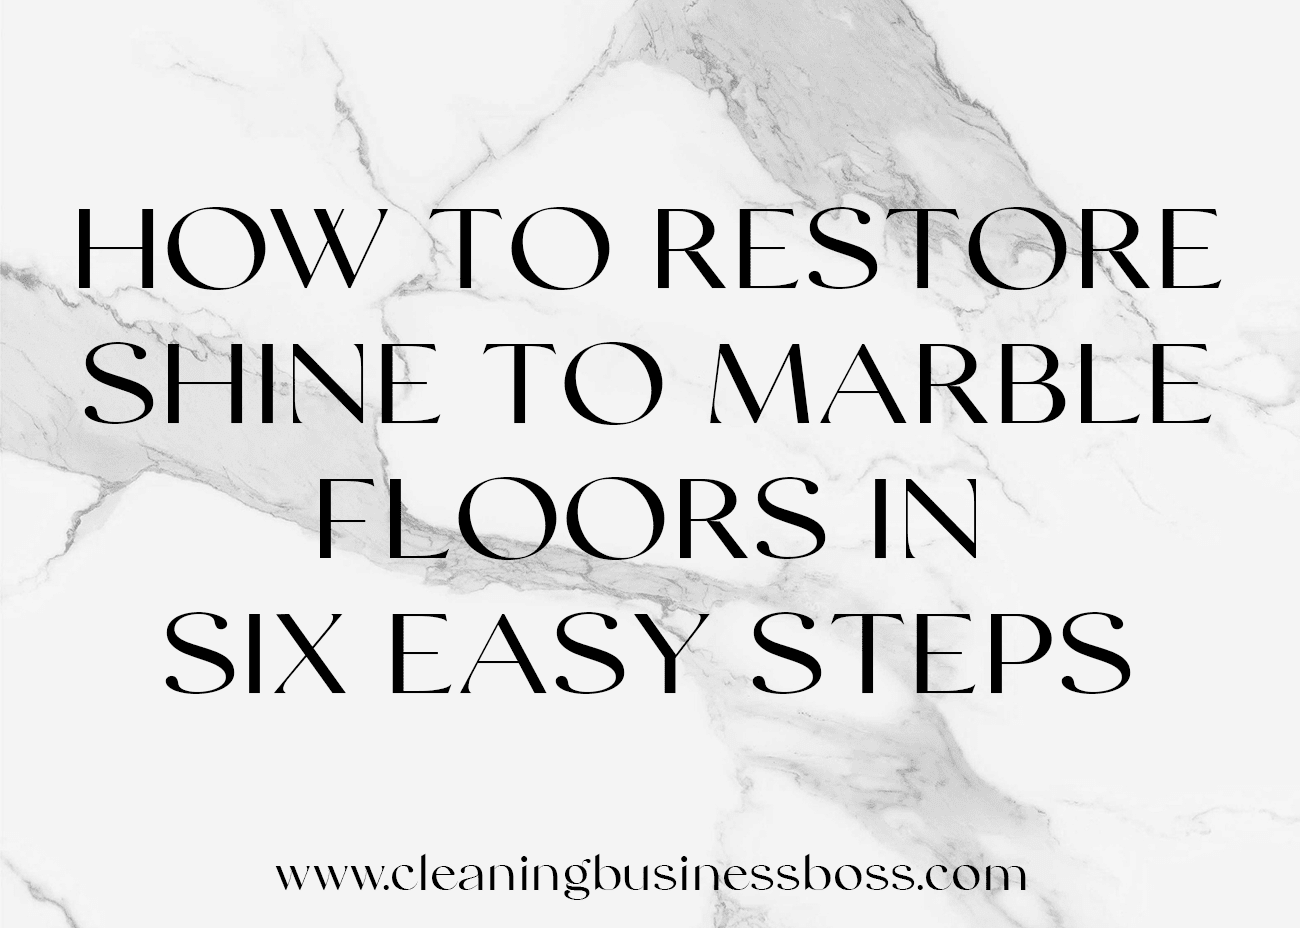 How To Restore Shine To Marble Floors In Six Easy Steps